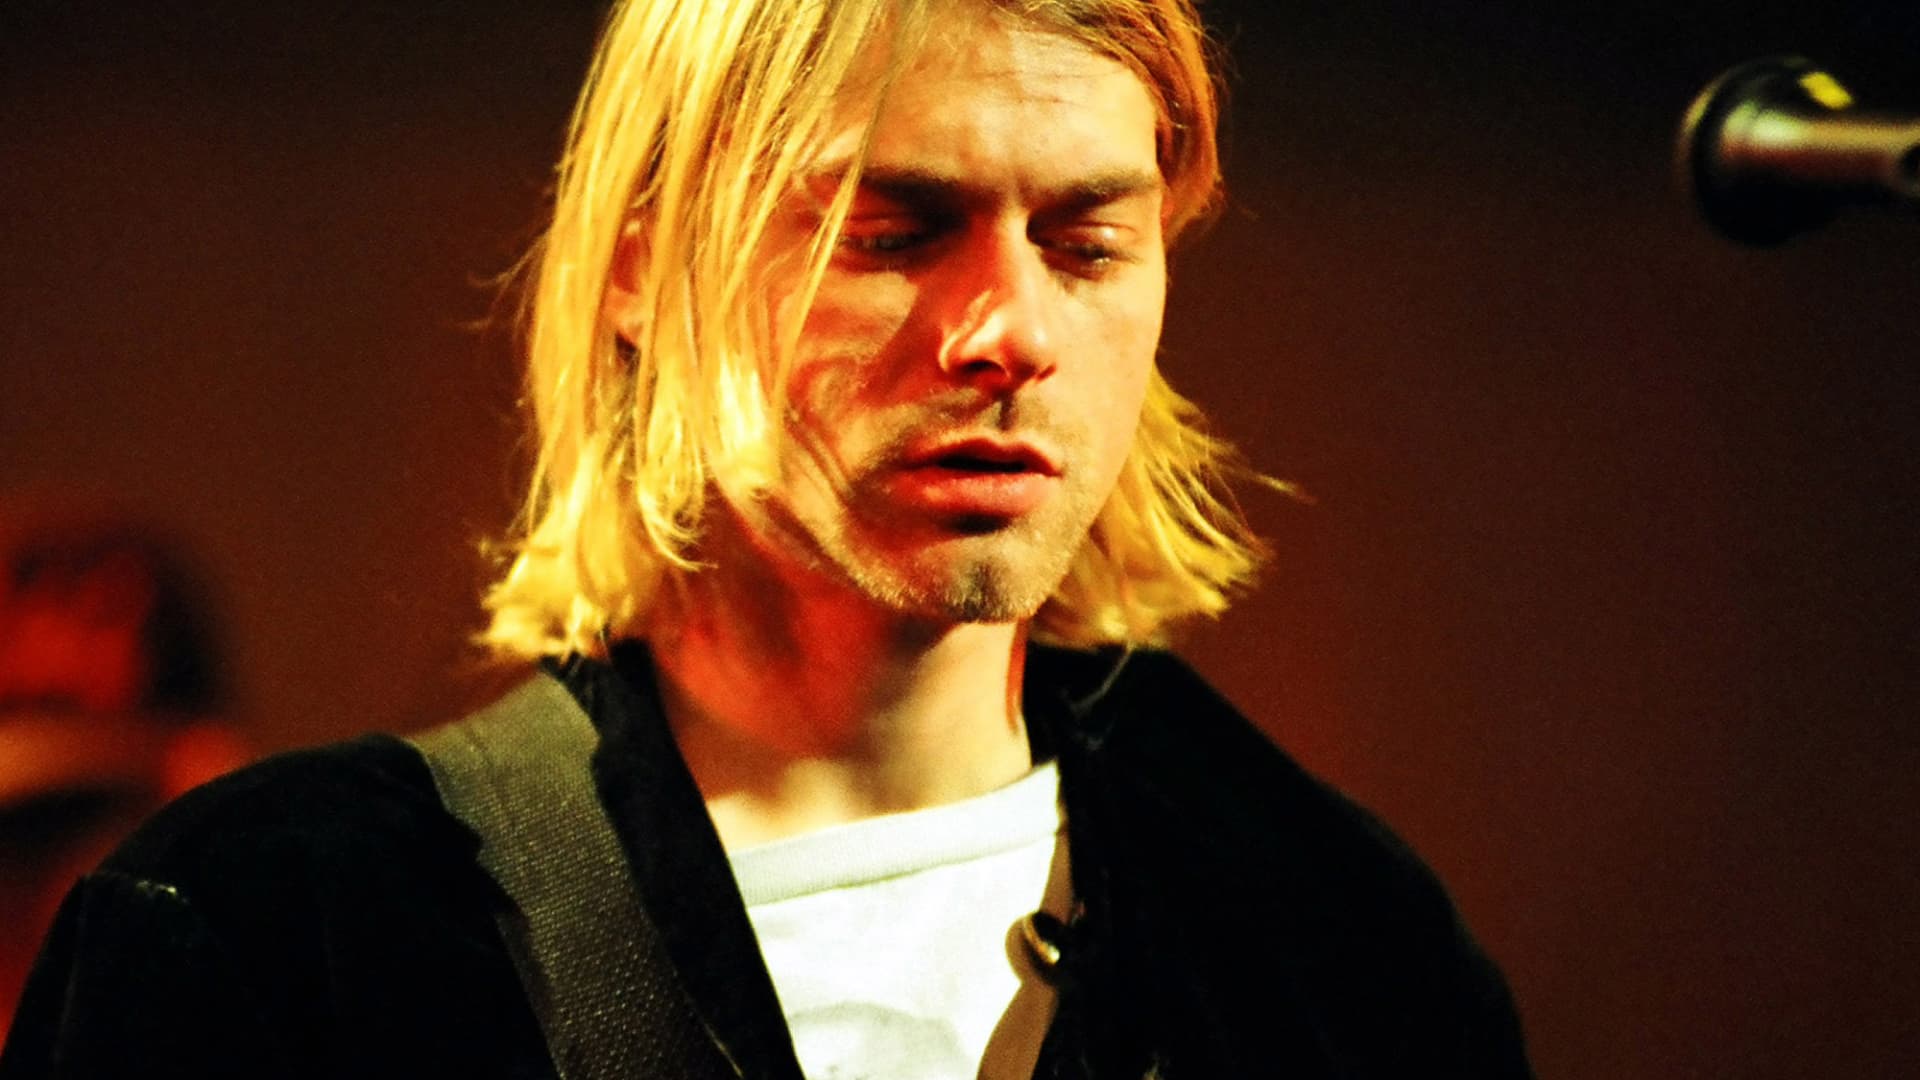 Kurt Cobain’s smashed Fender guitar sells for almost $600,000